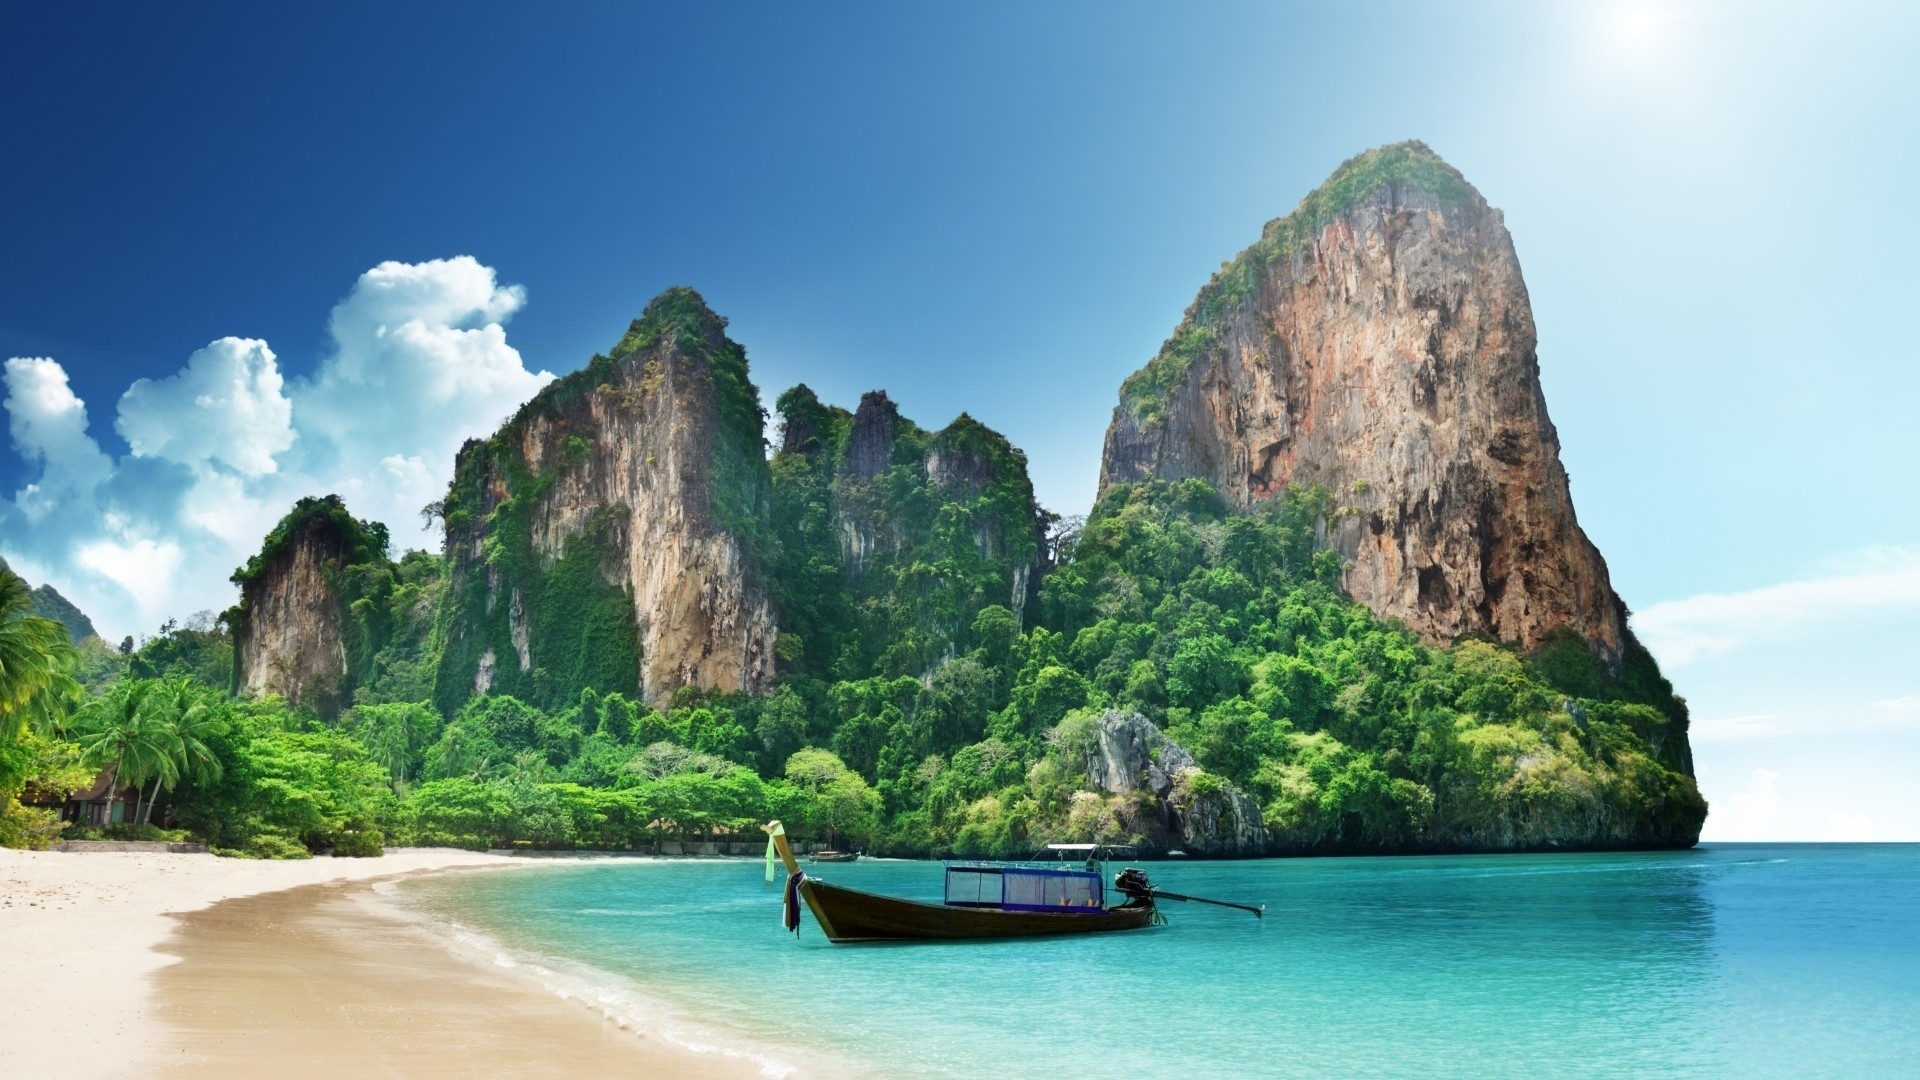 General 1920x1080 nature landscape mountains clouds Thailand trees forest sea sand beach boat palm trees house vehicle rocks